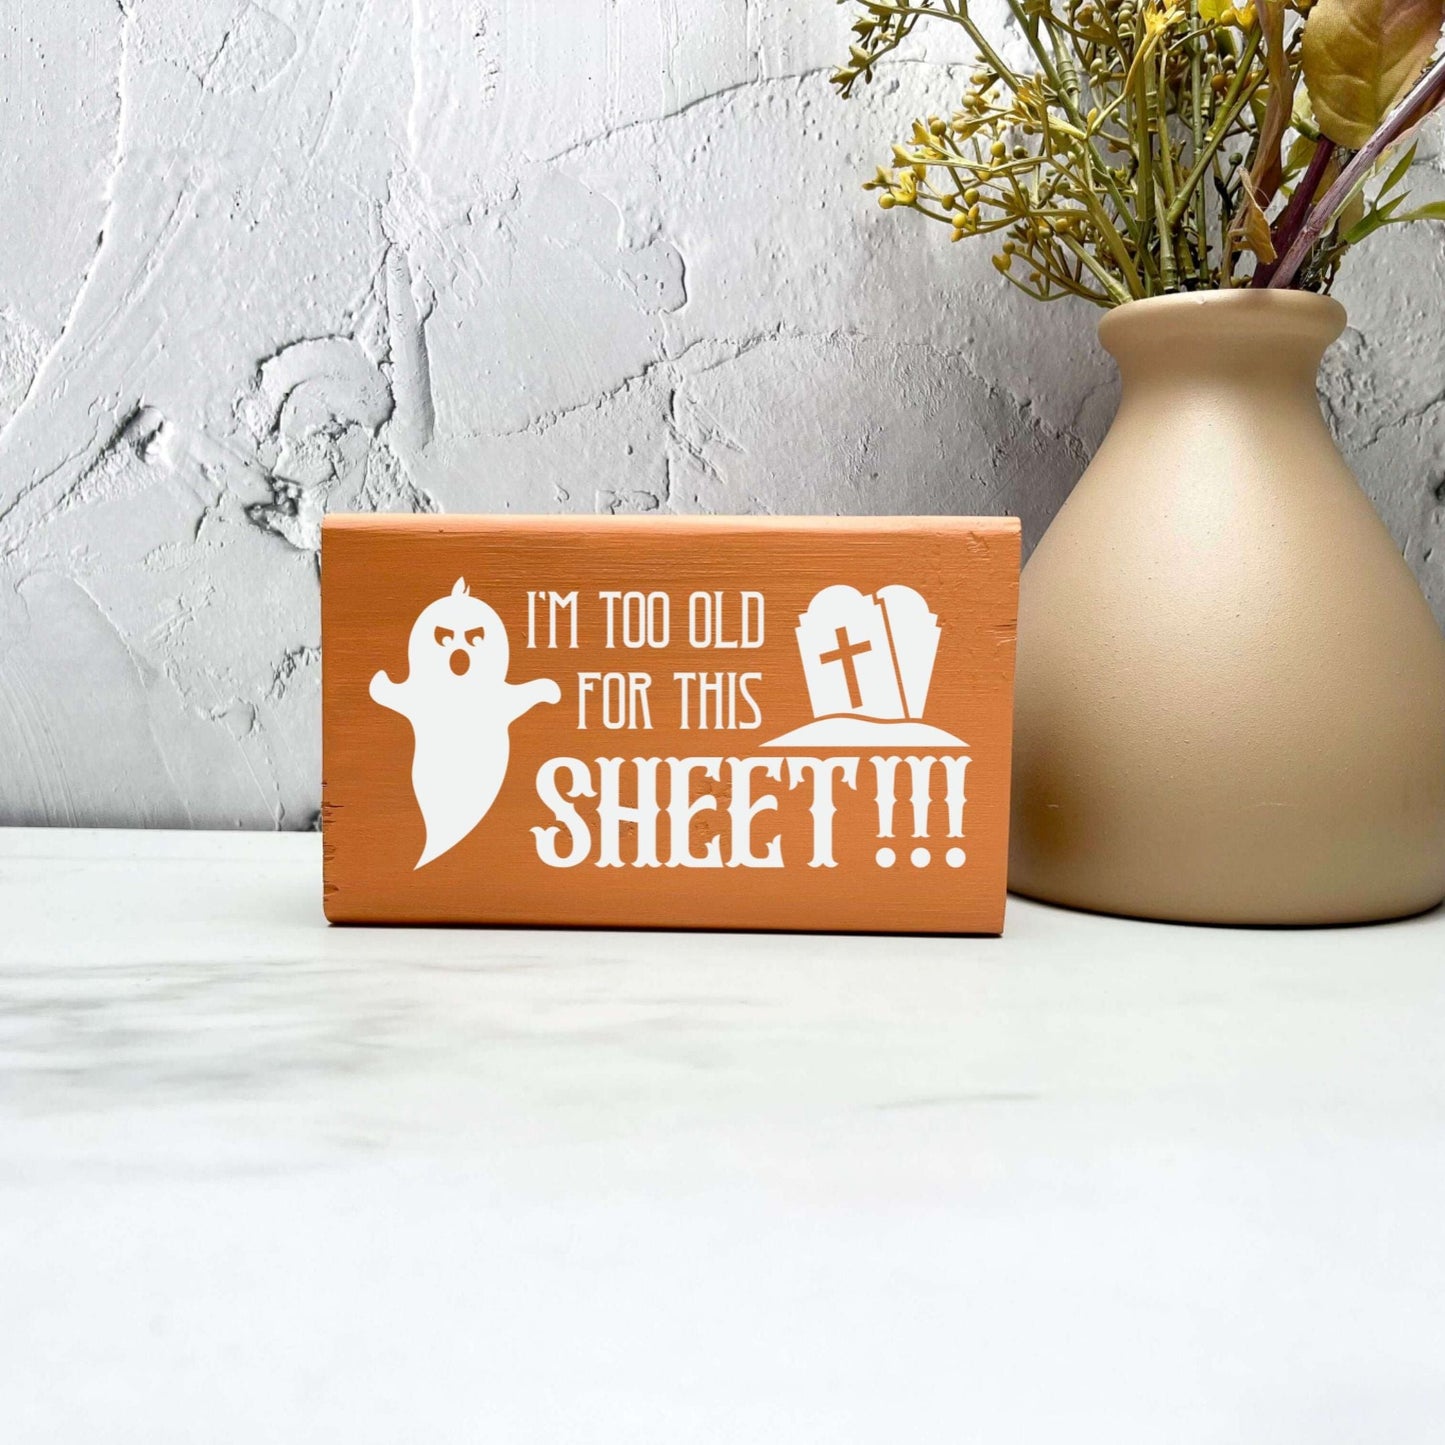 Too old for this sheet Sign, Halloween Wood Sign, Halloween Home Decor, Spooky Decor